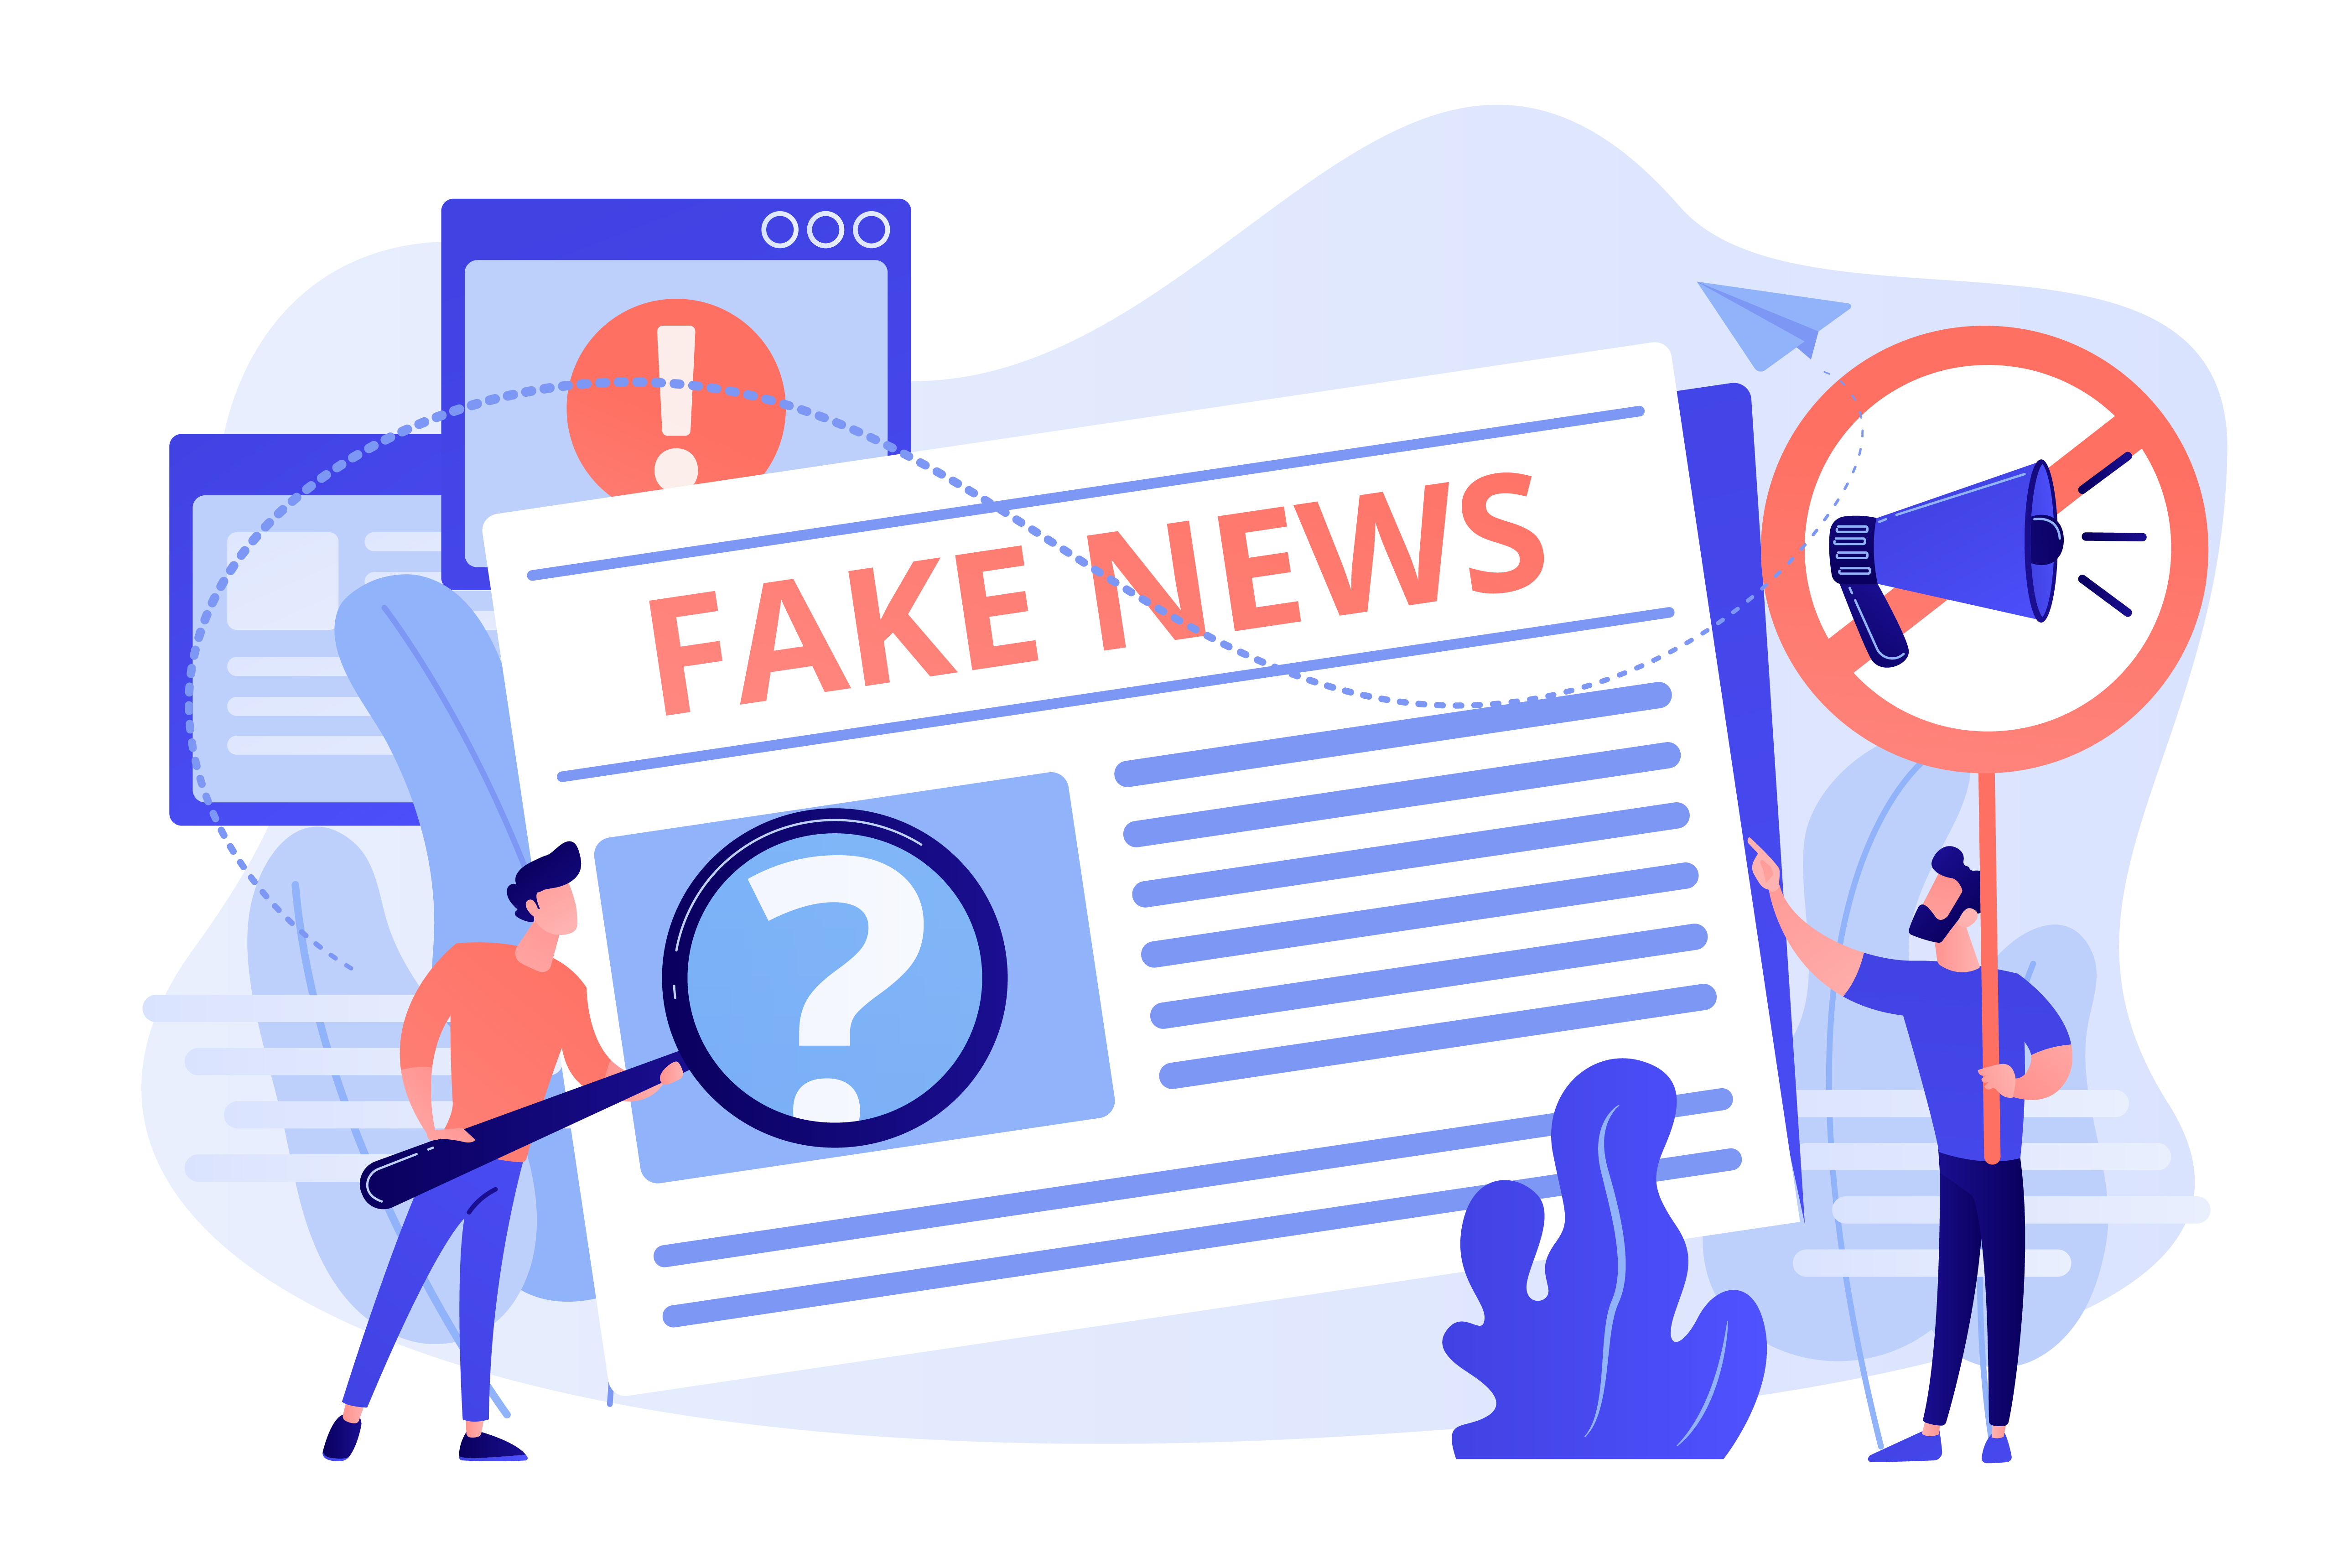 What is “fake news”?